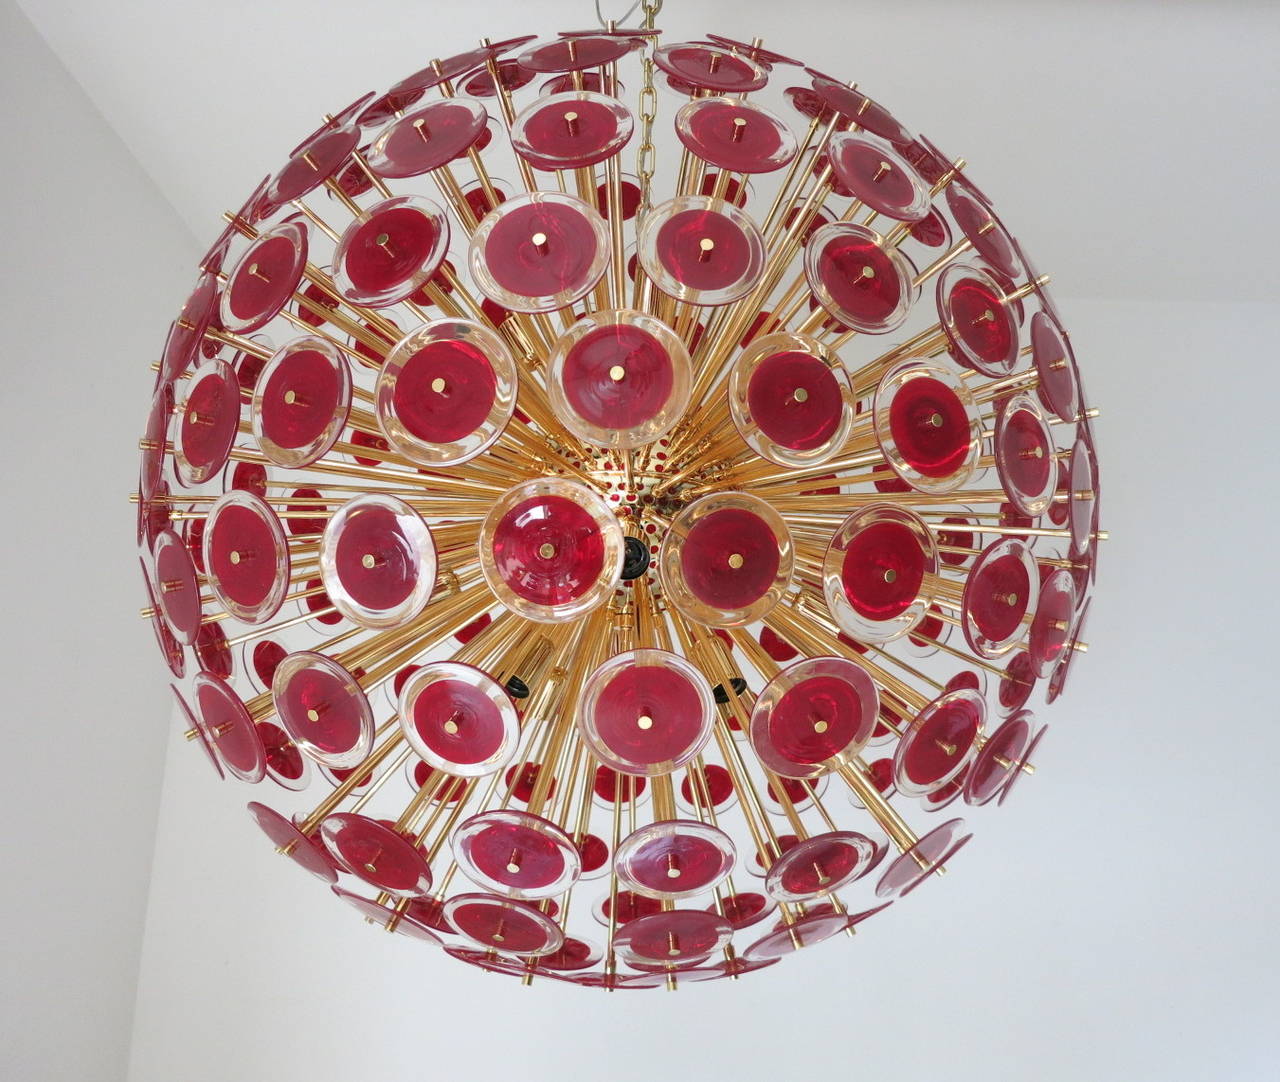 A fabulous Vistosi red Murano glass chandelier. Frame is polished brass with 16 regular light sockets. Chandelier is decorated with 207 red and clear glass discs for spectacular presentation. Size given is for fixture only (excludes chain and